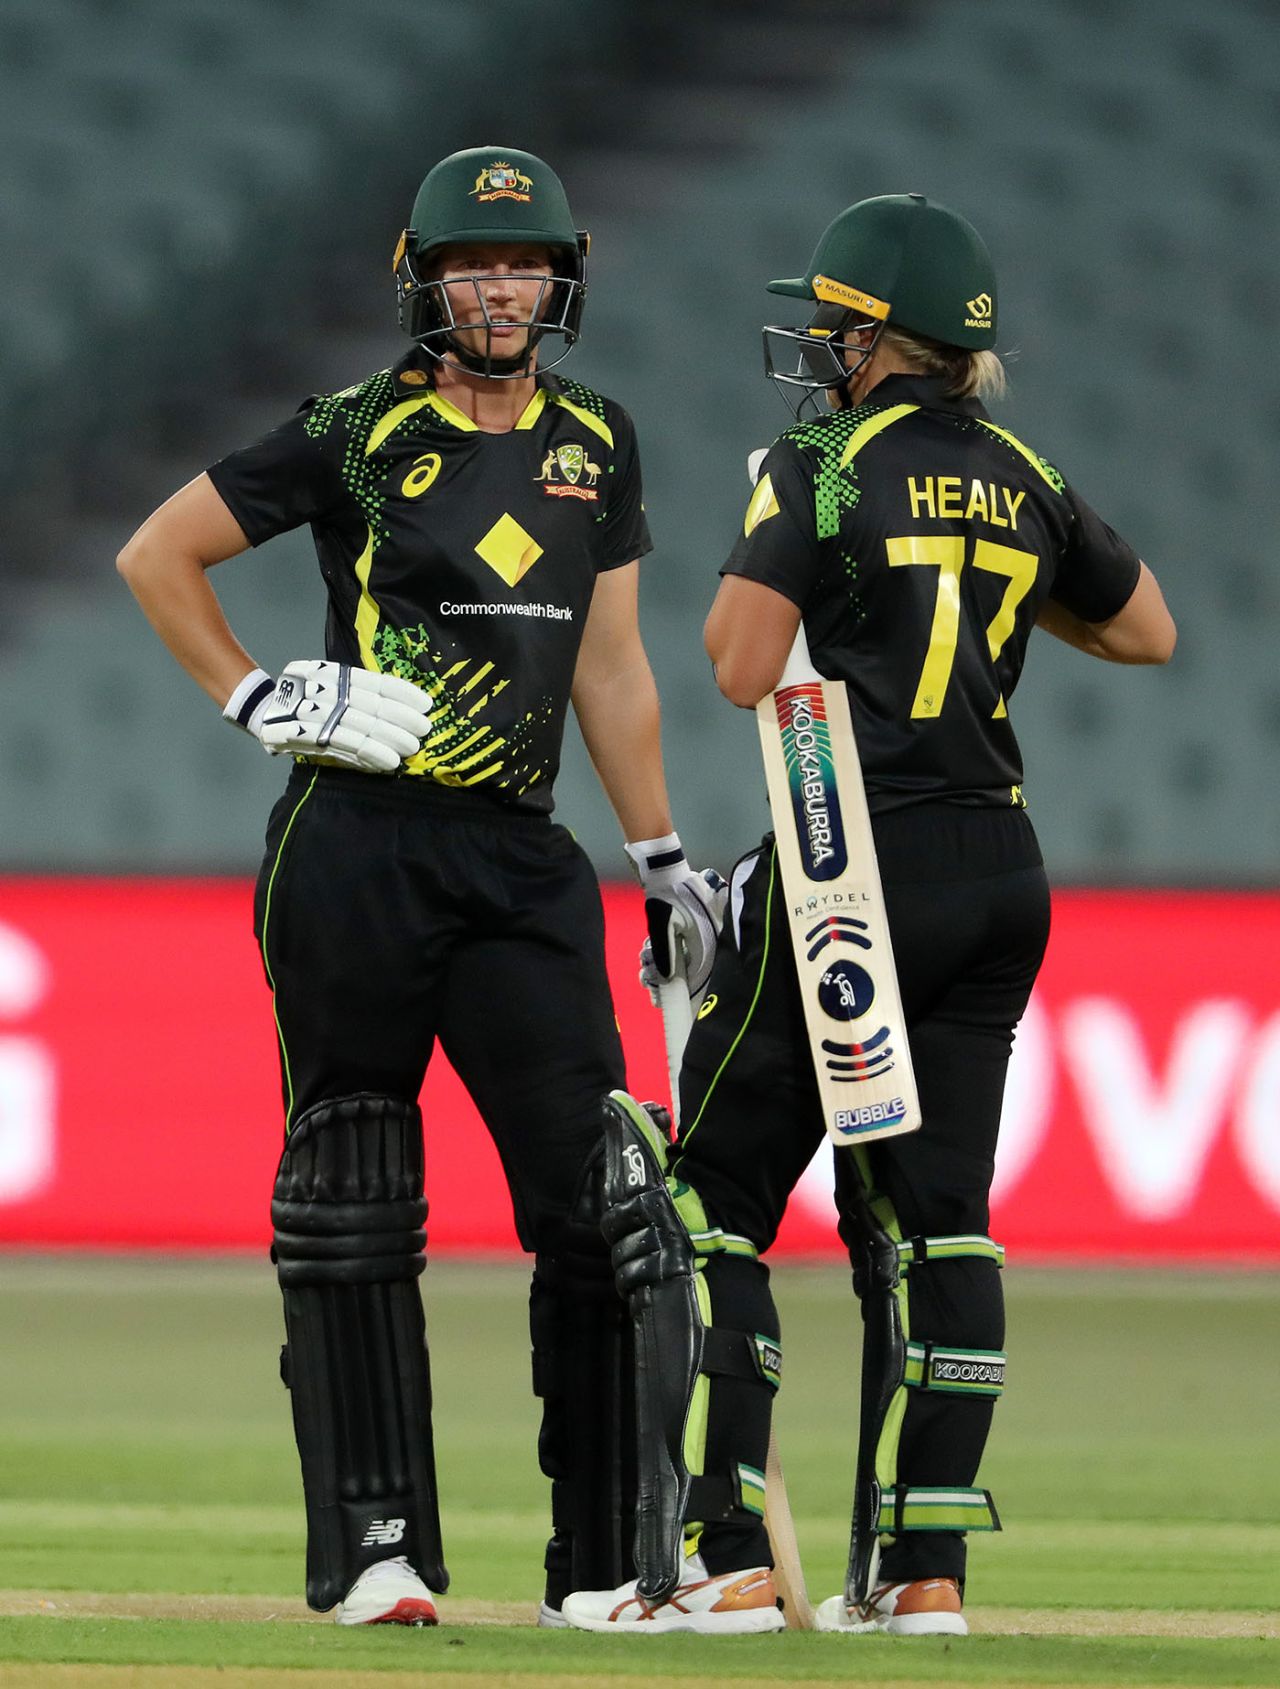 Meg Lanning and Alyssa Healy chat in the middle, Australia Women vs England Women, Women's Ashes, 1st T20I, Adelaide Oval, January 20, 2022